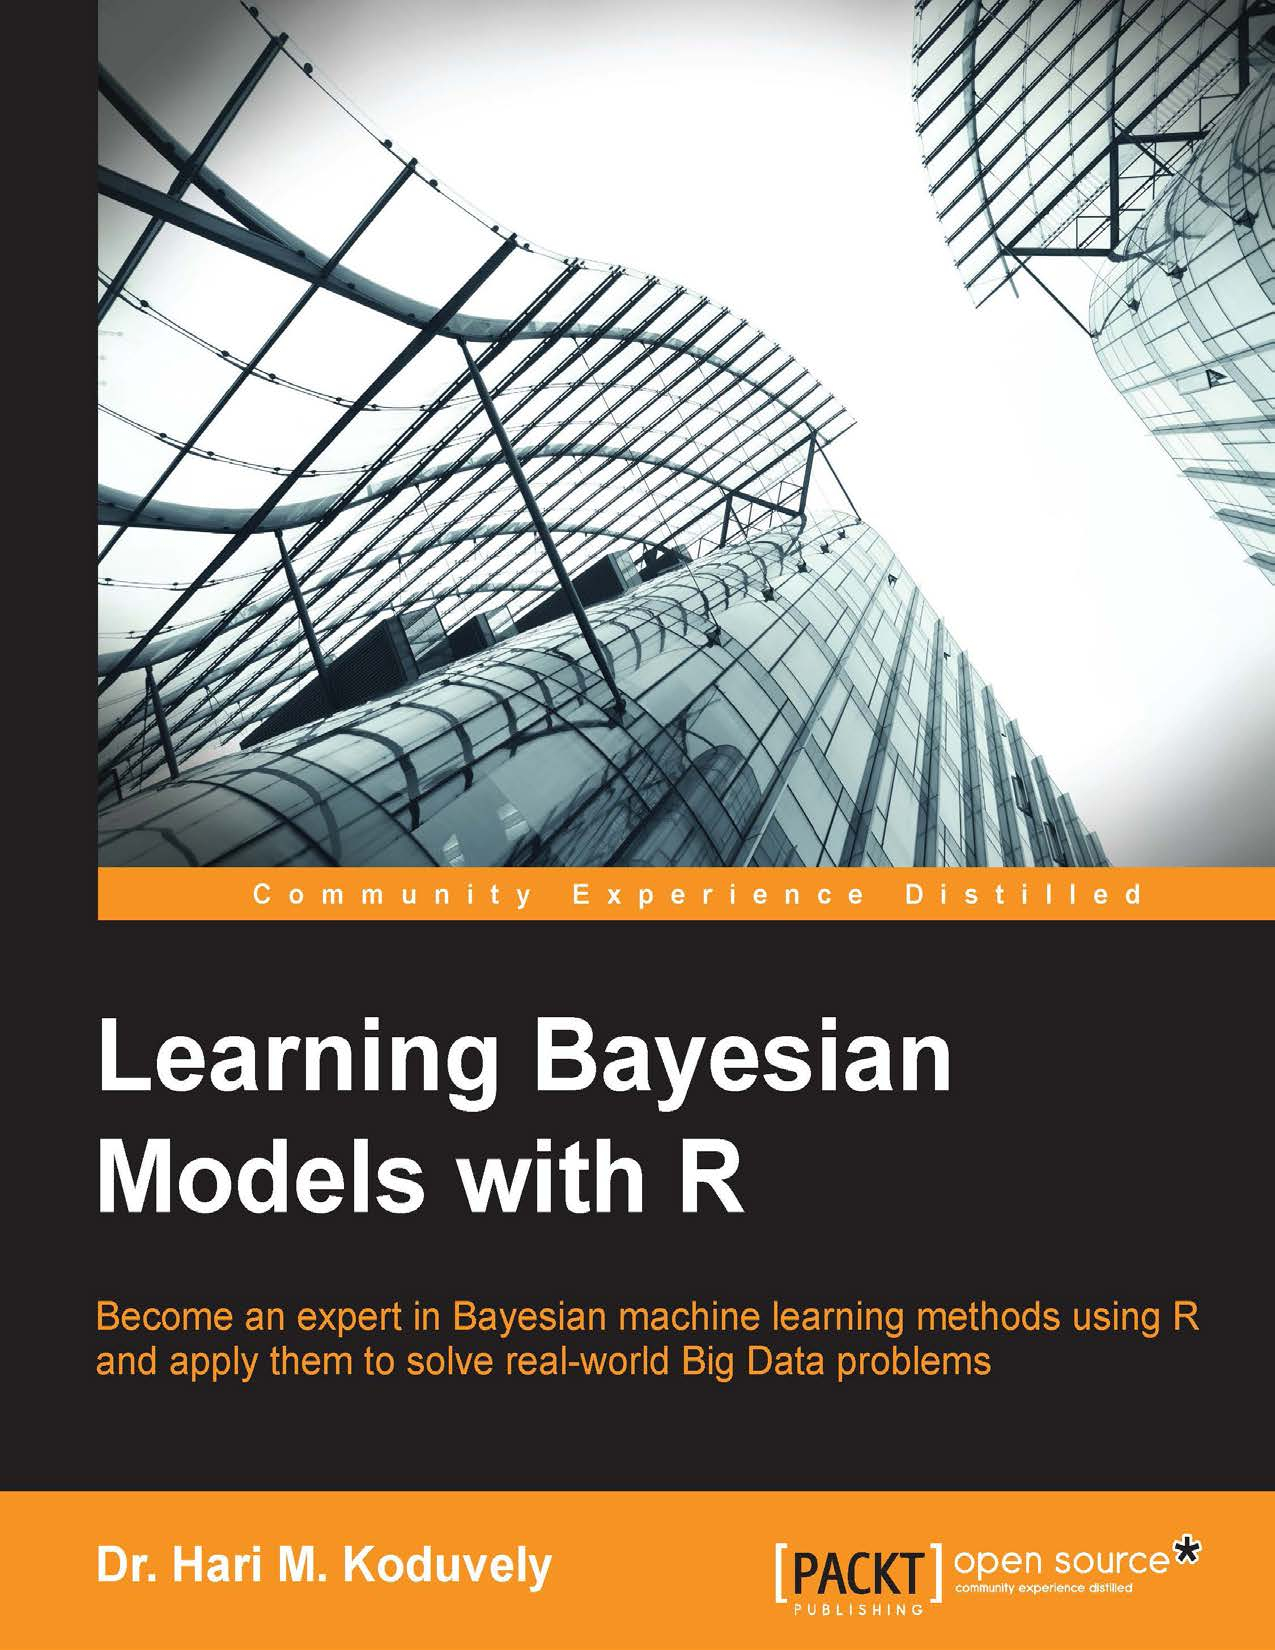 Learning Bayesian Models with R - Dr. Hari M. Koduvely